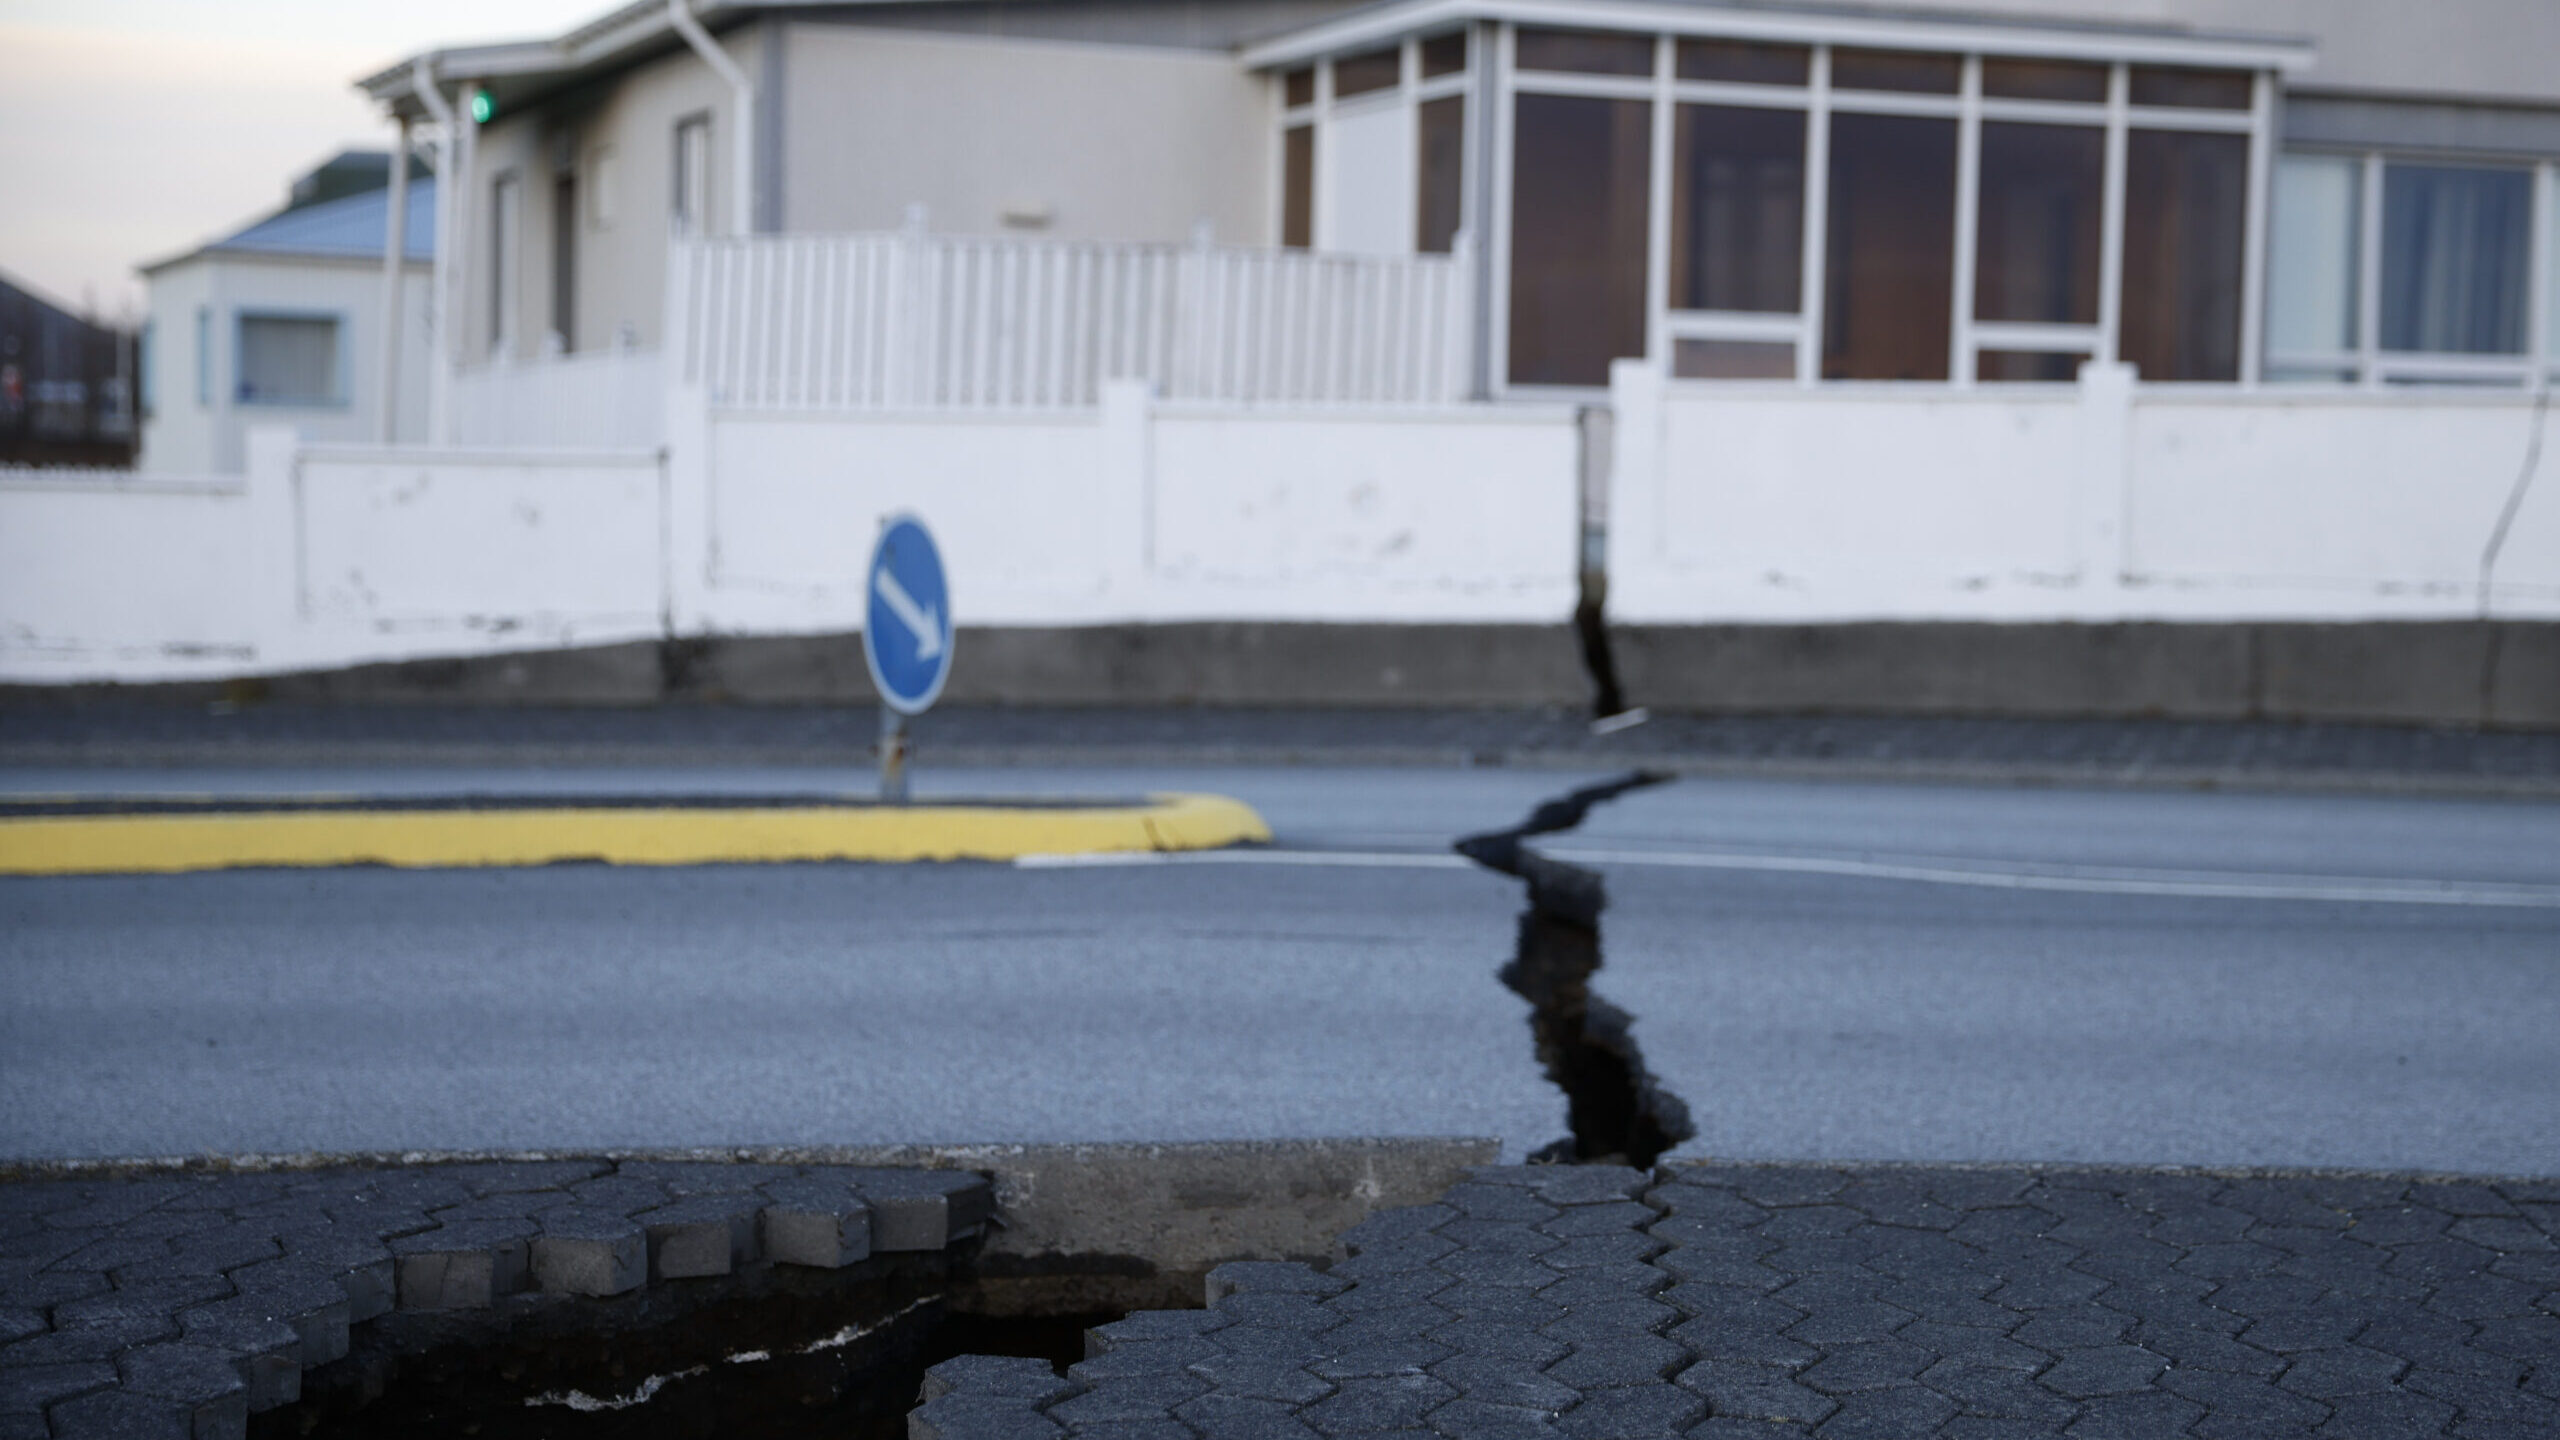 A fissure stretches across a road in the town of Grindavik, Iceland....